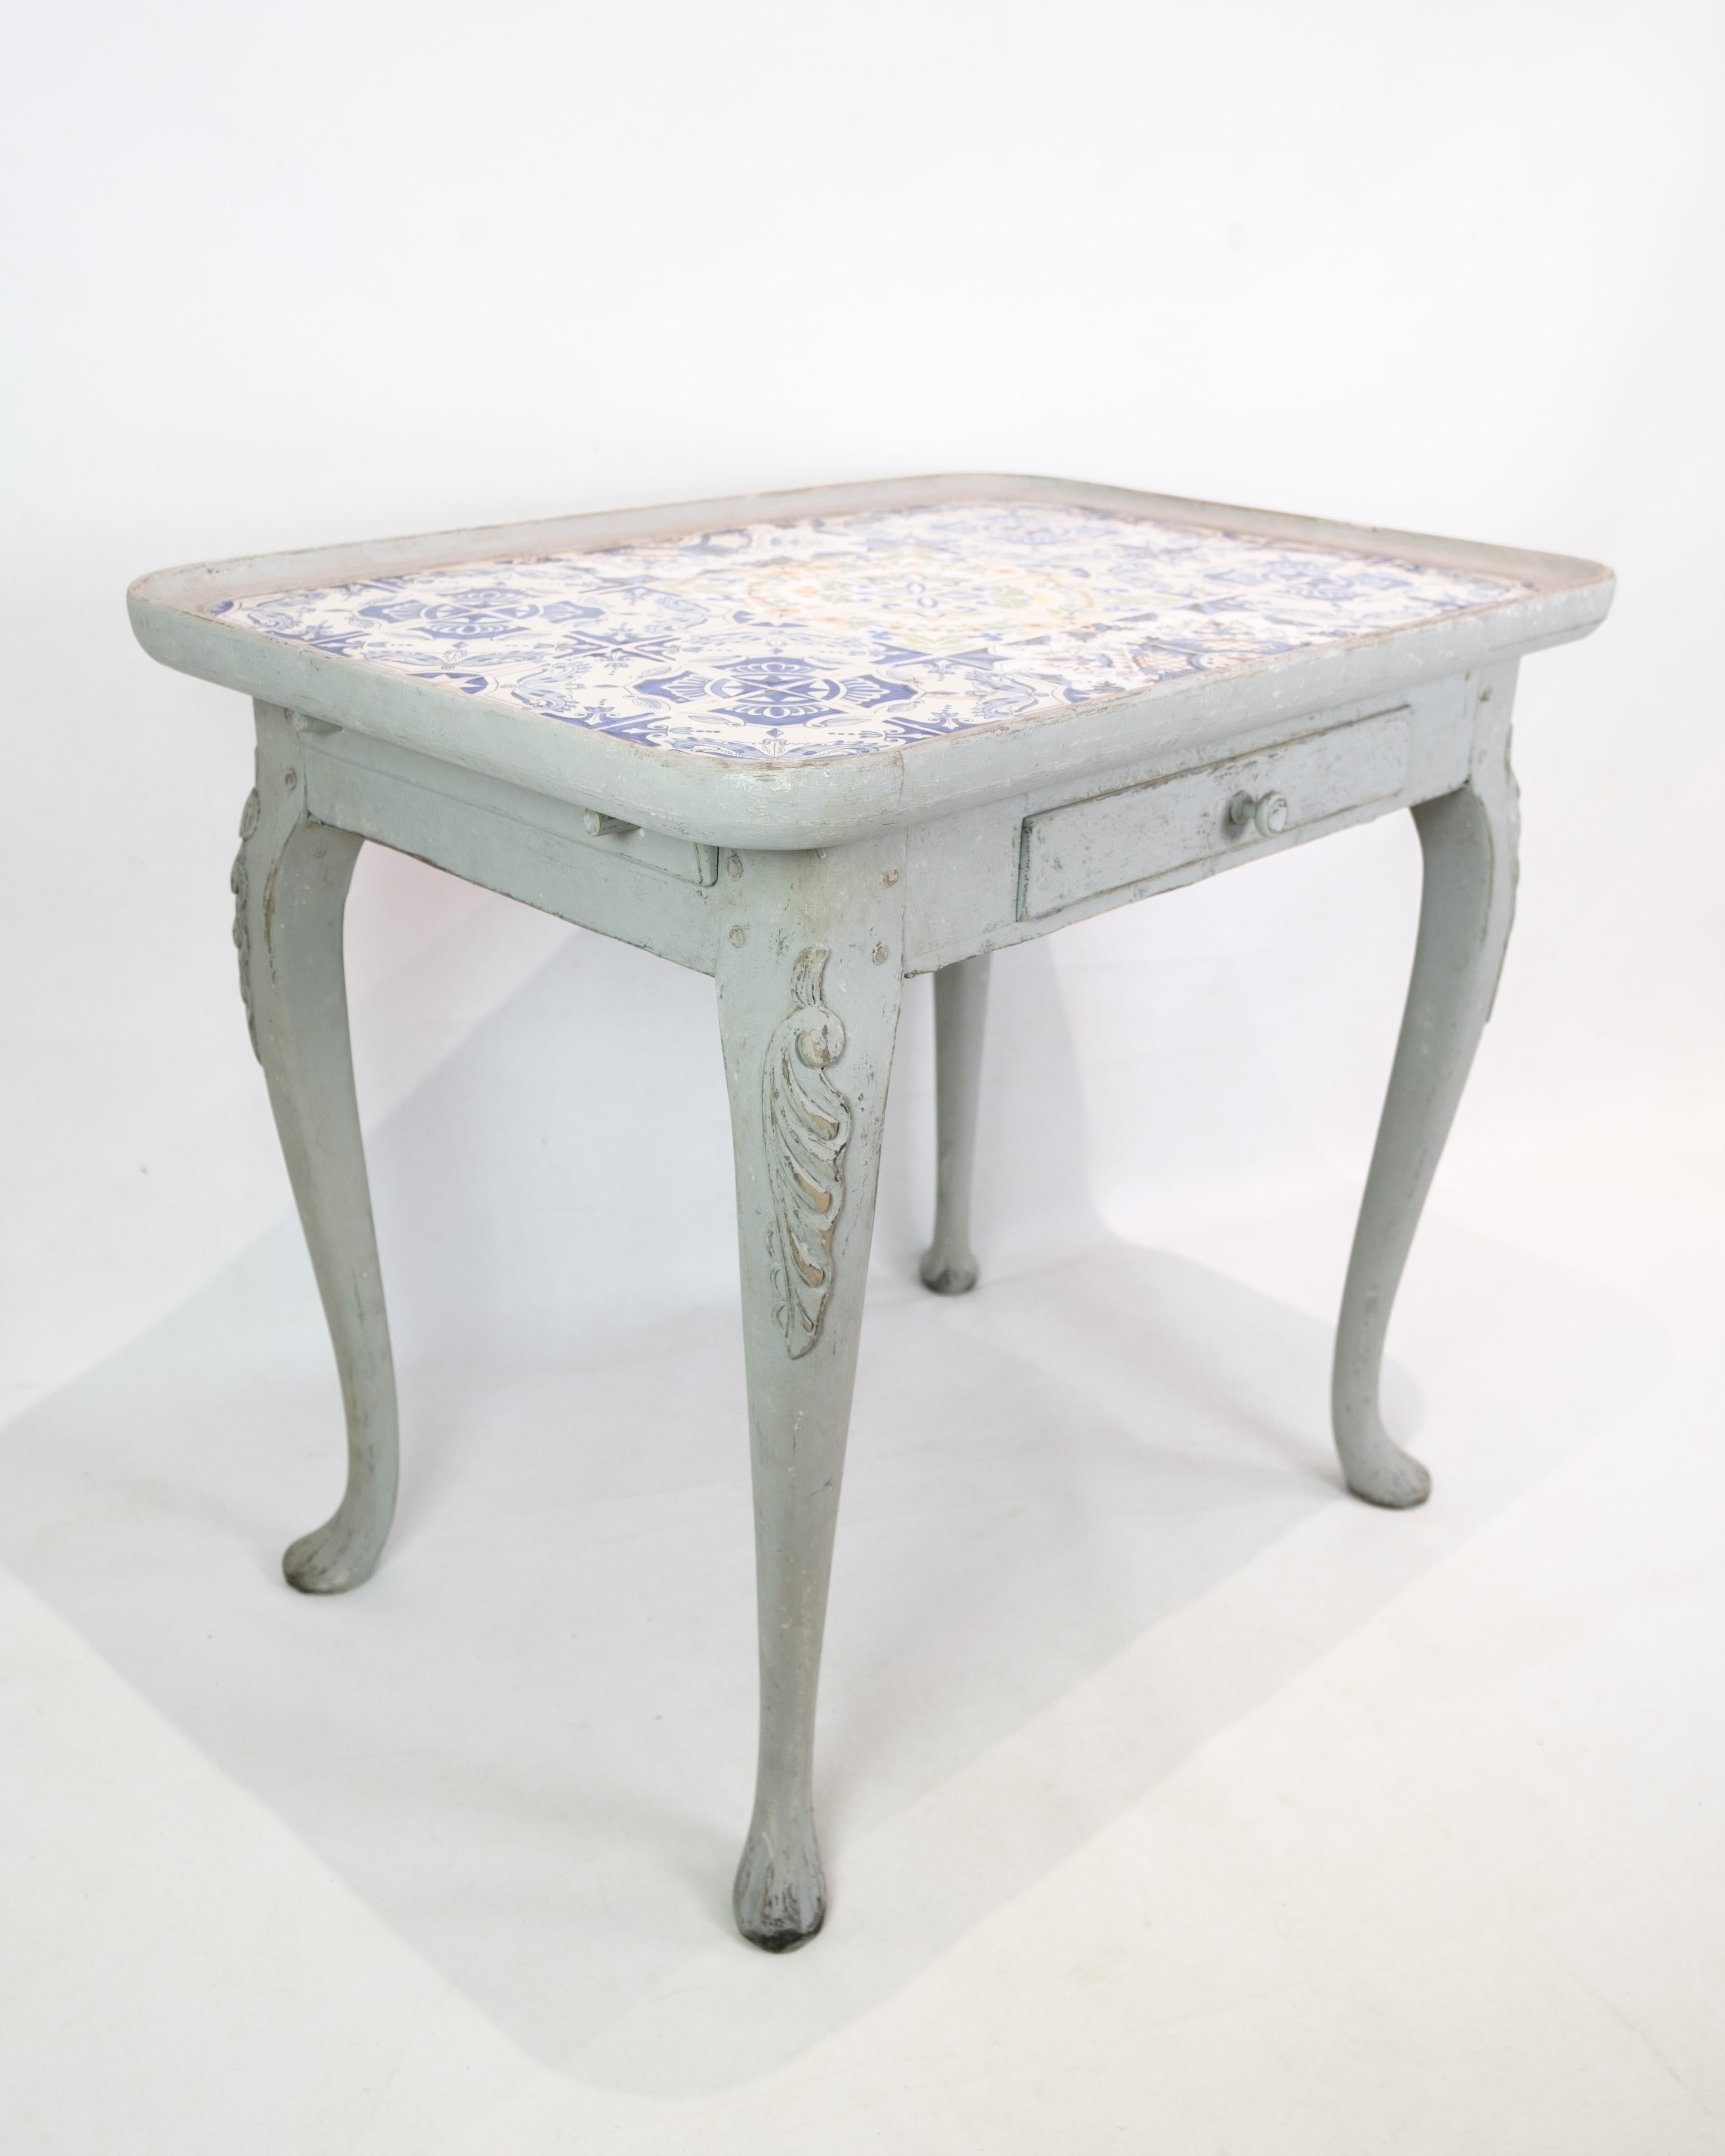 Danish The Rococo Tile Table Painted in Grey From 1780s For Sale